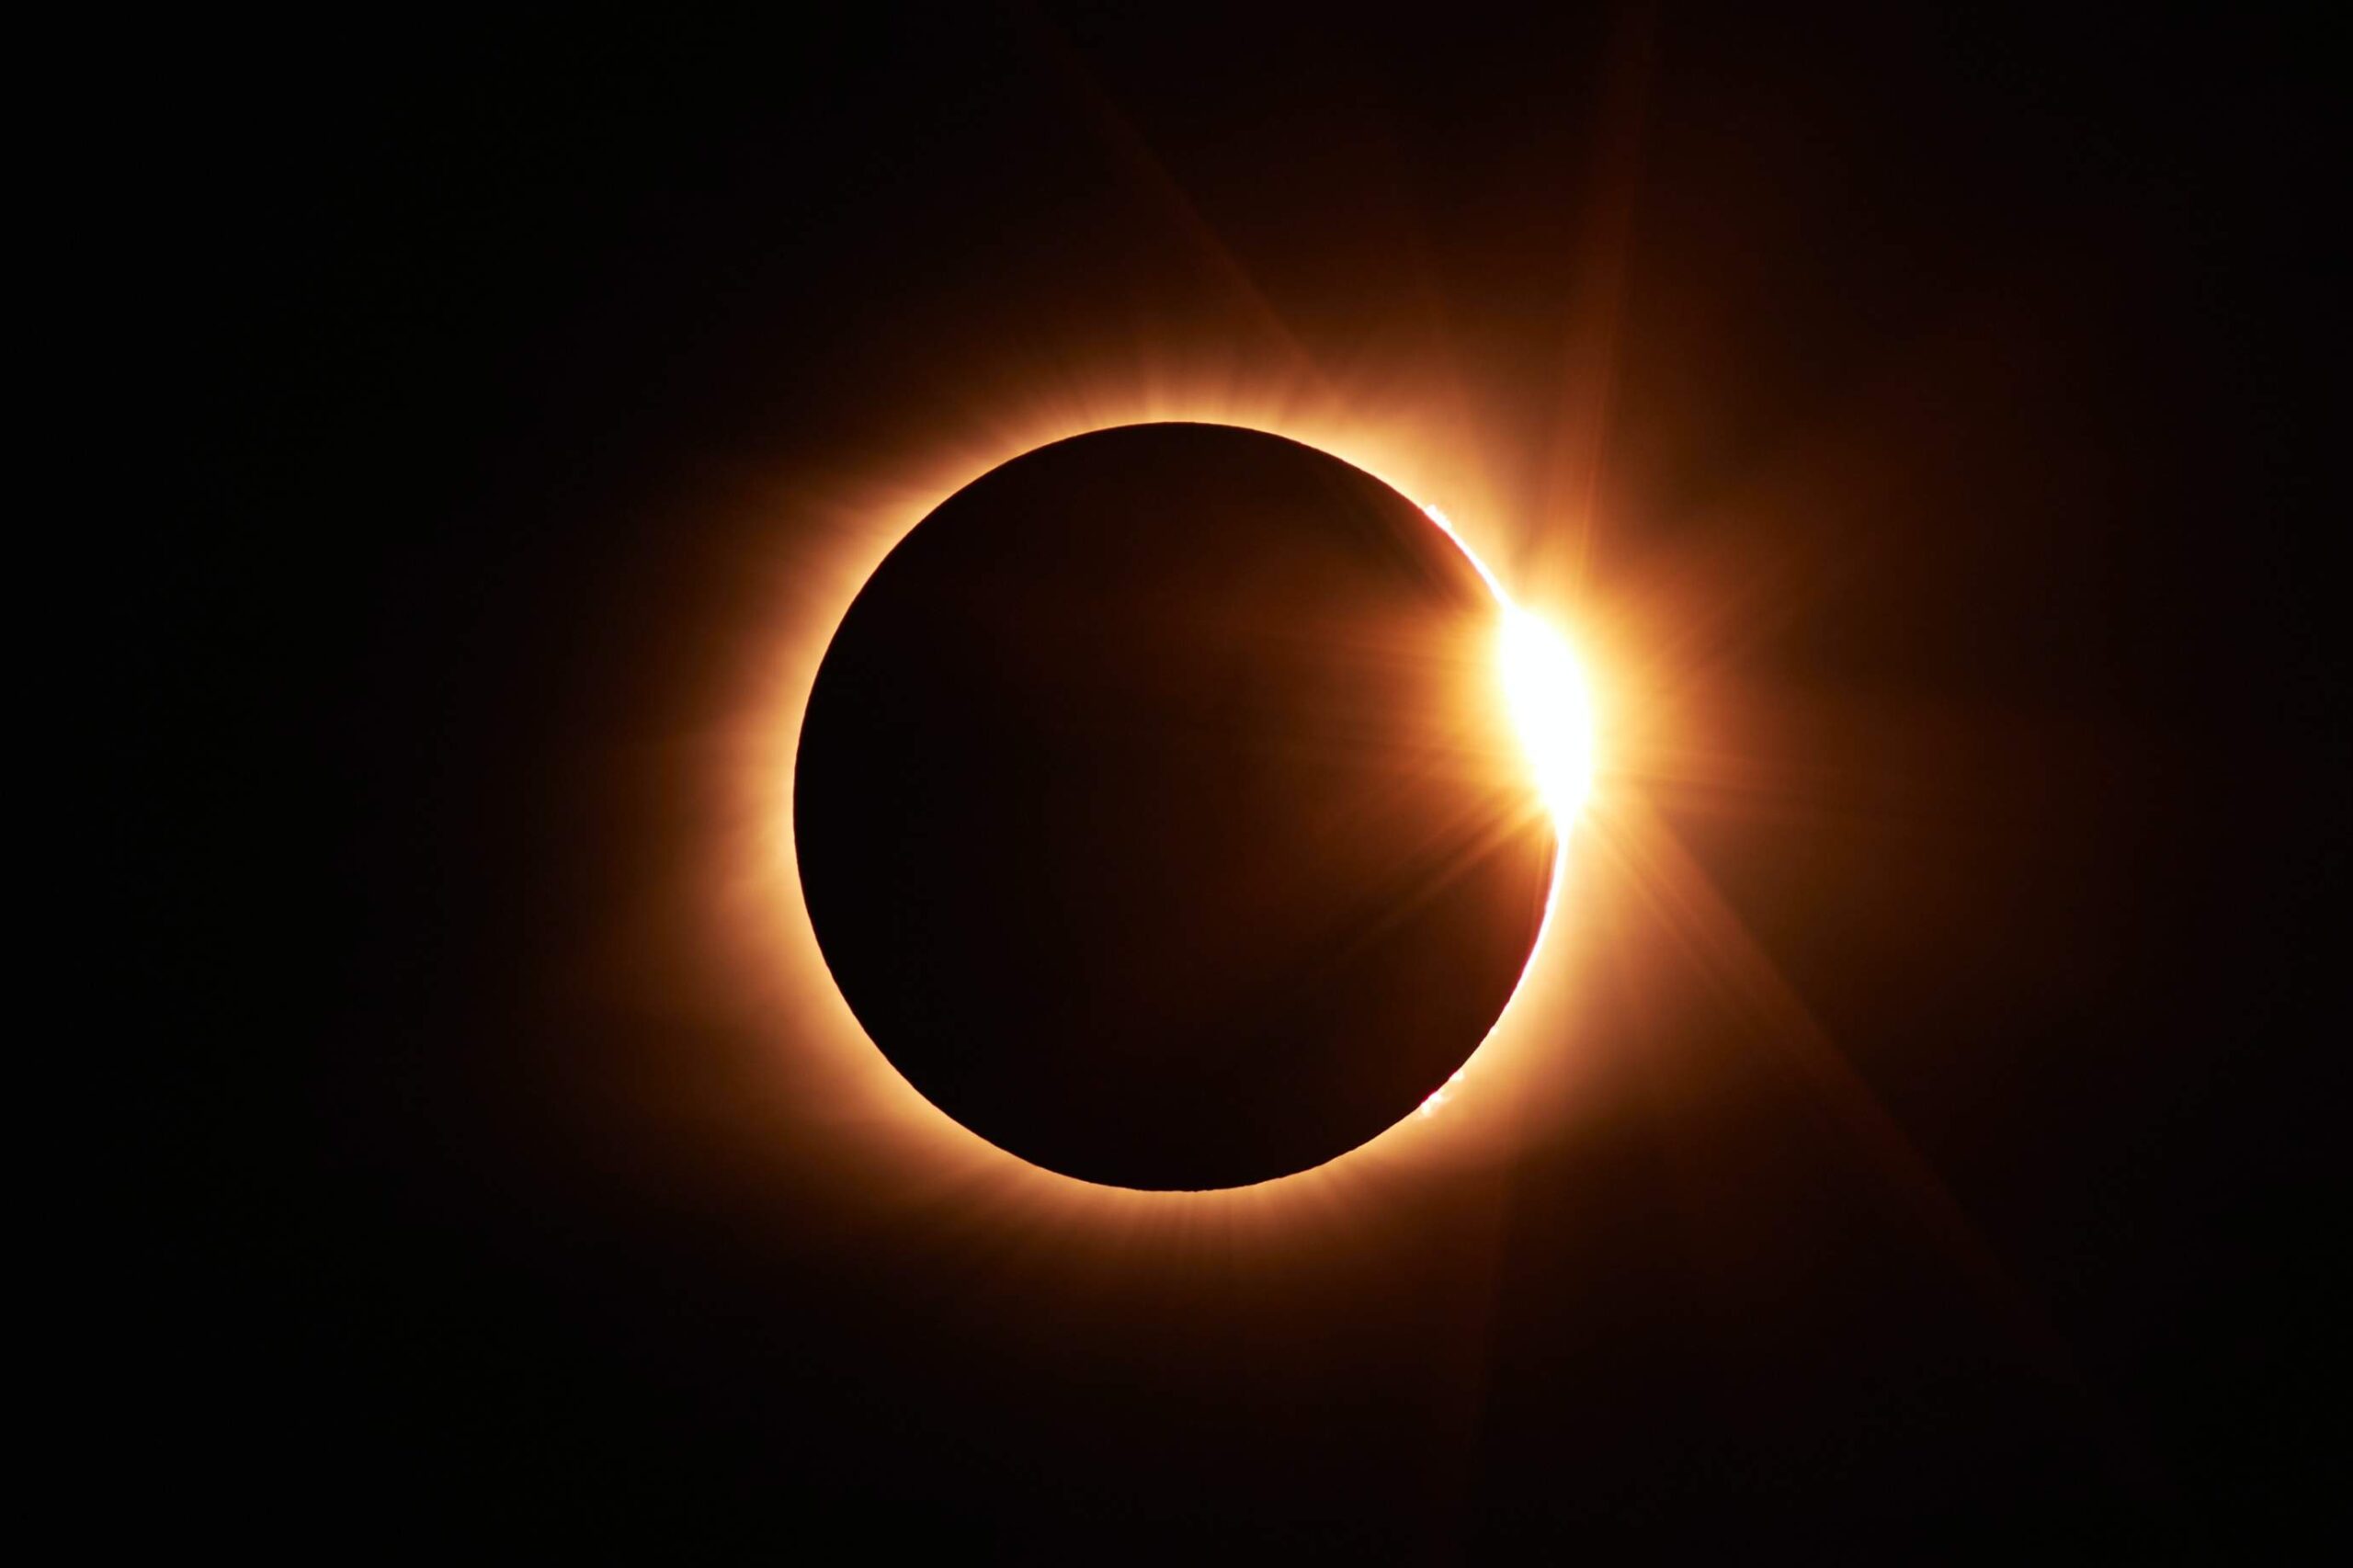 Annular Solar Eclipse to be Visible This Saturday